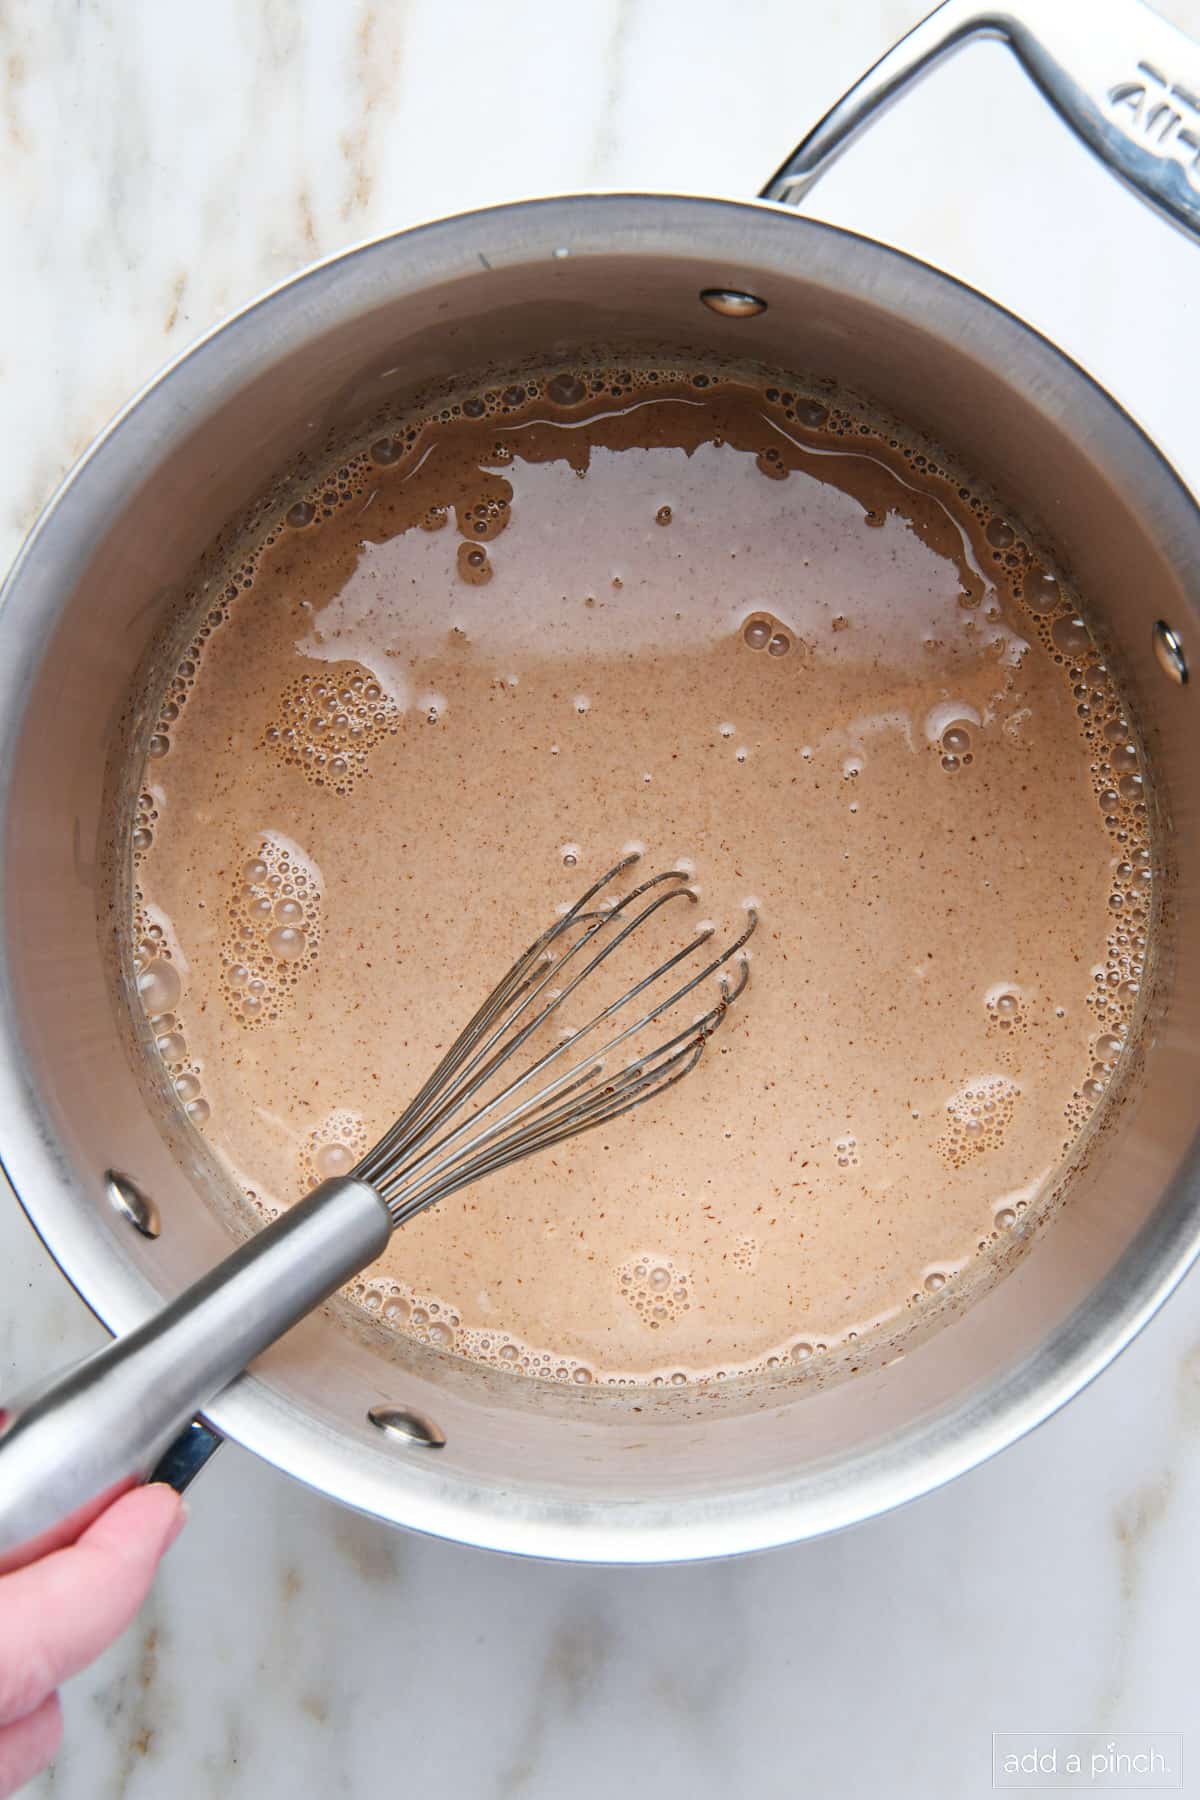 Whisking chopped chocolate into warmed cream and milk.